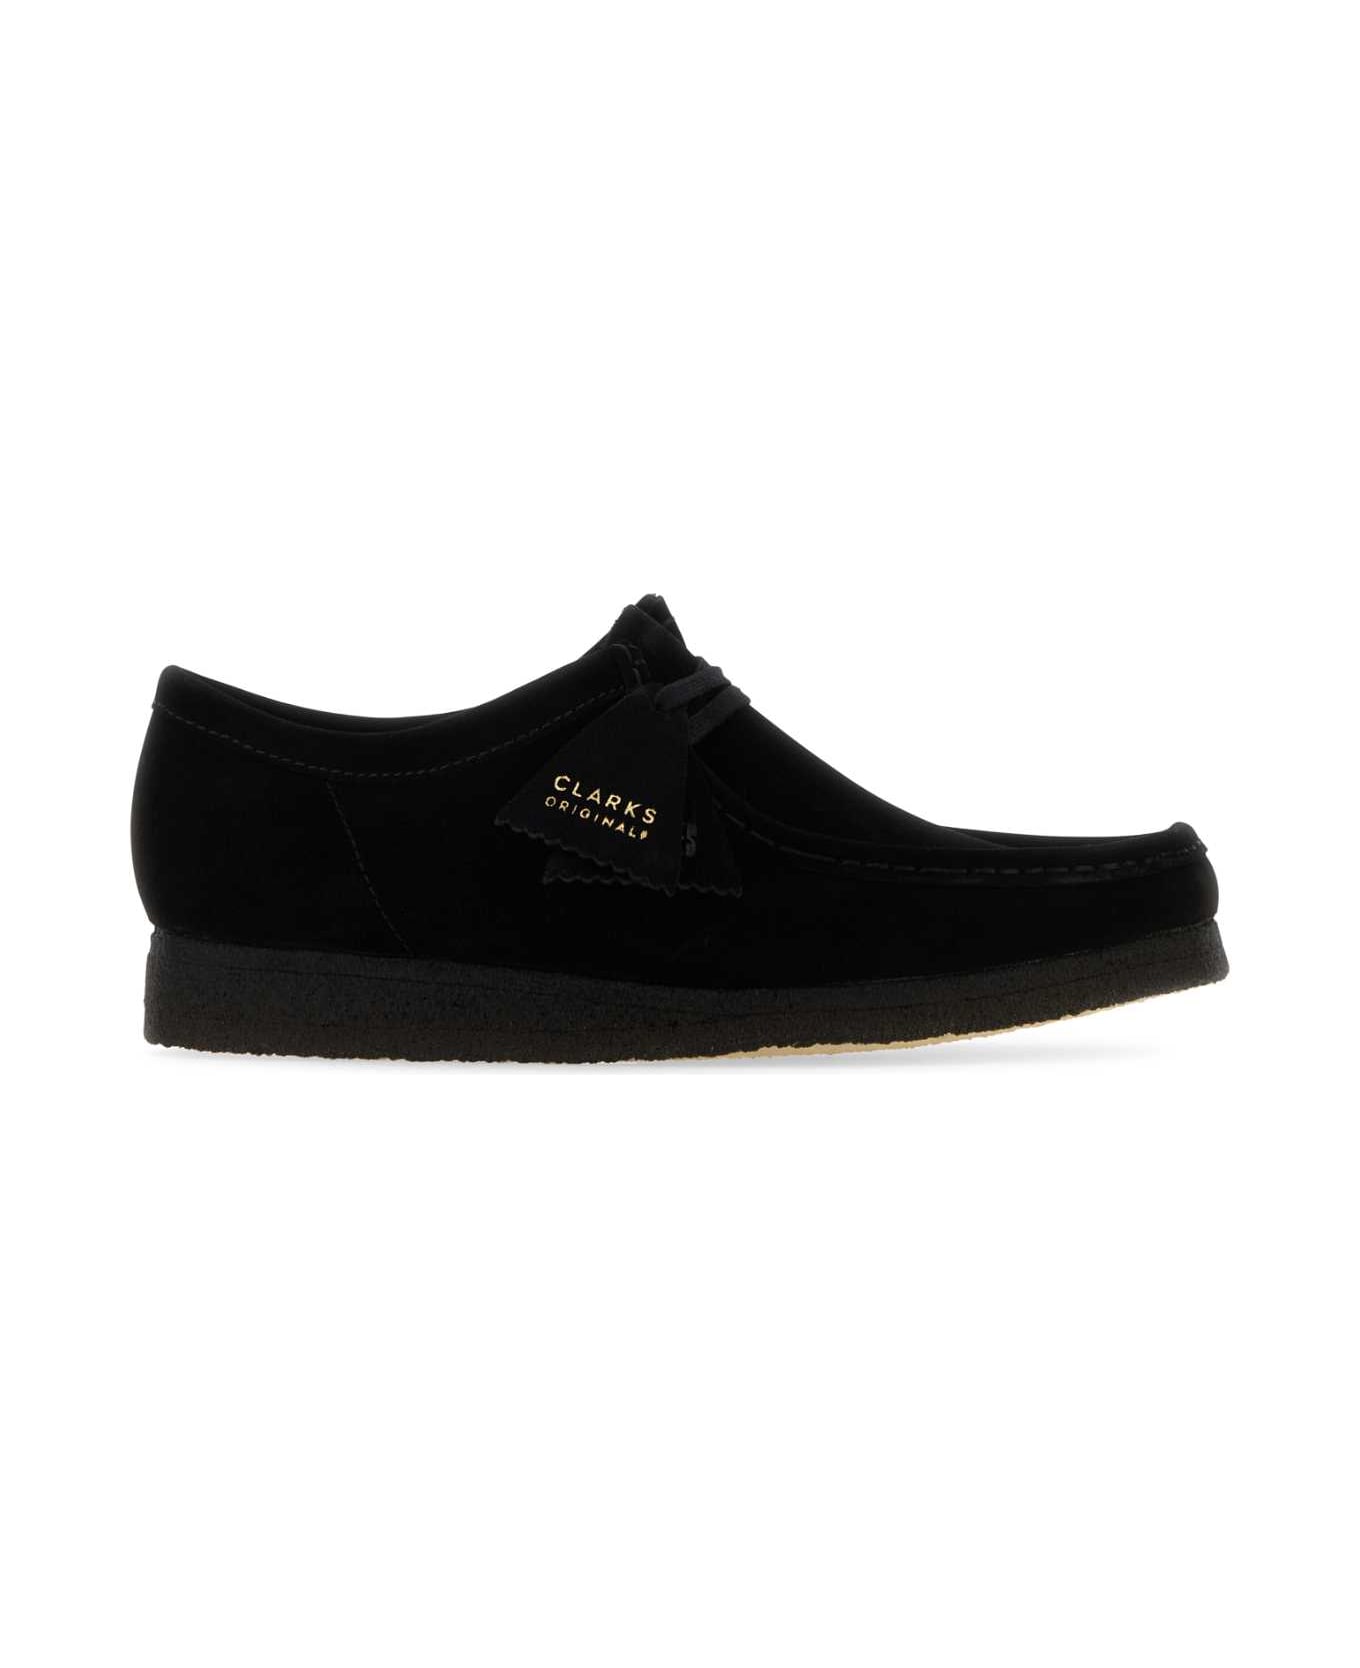 Clarks Black Suede Wallabee Ankle Boots - BLACKSDE